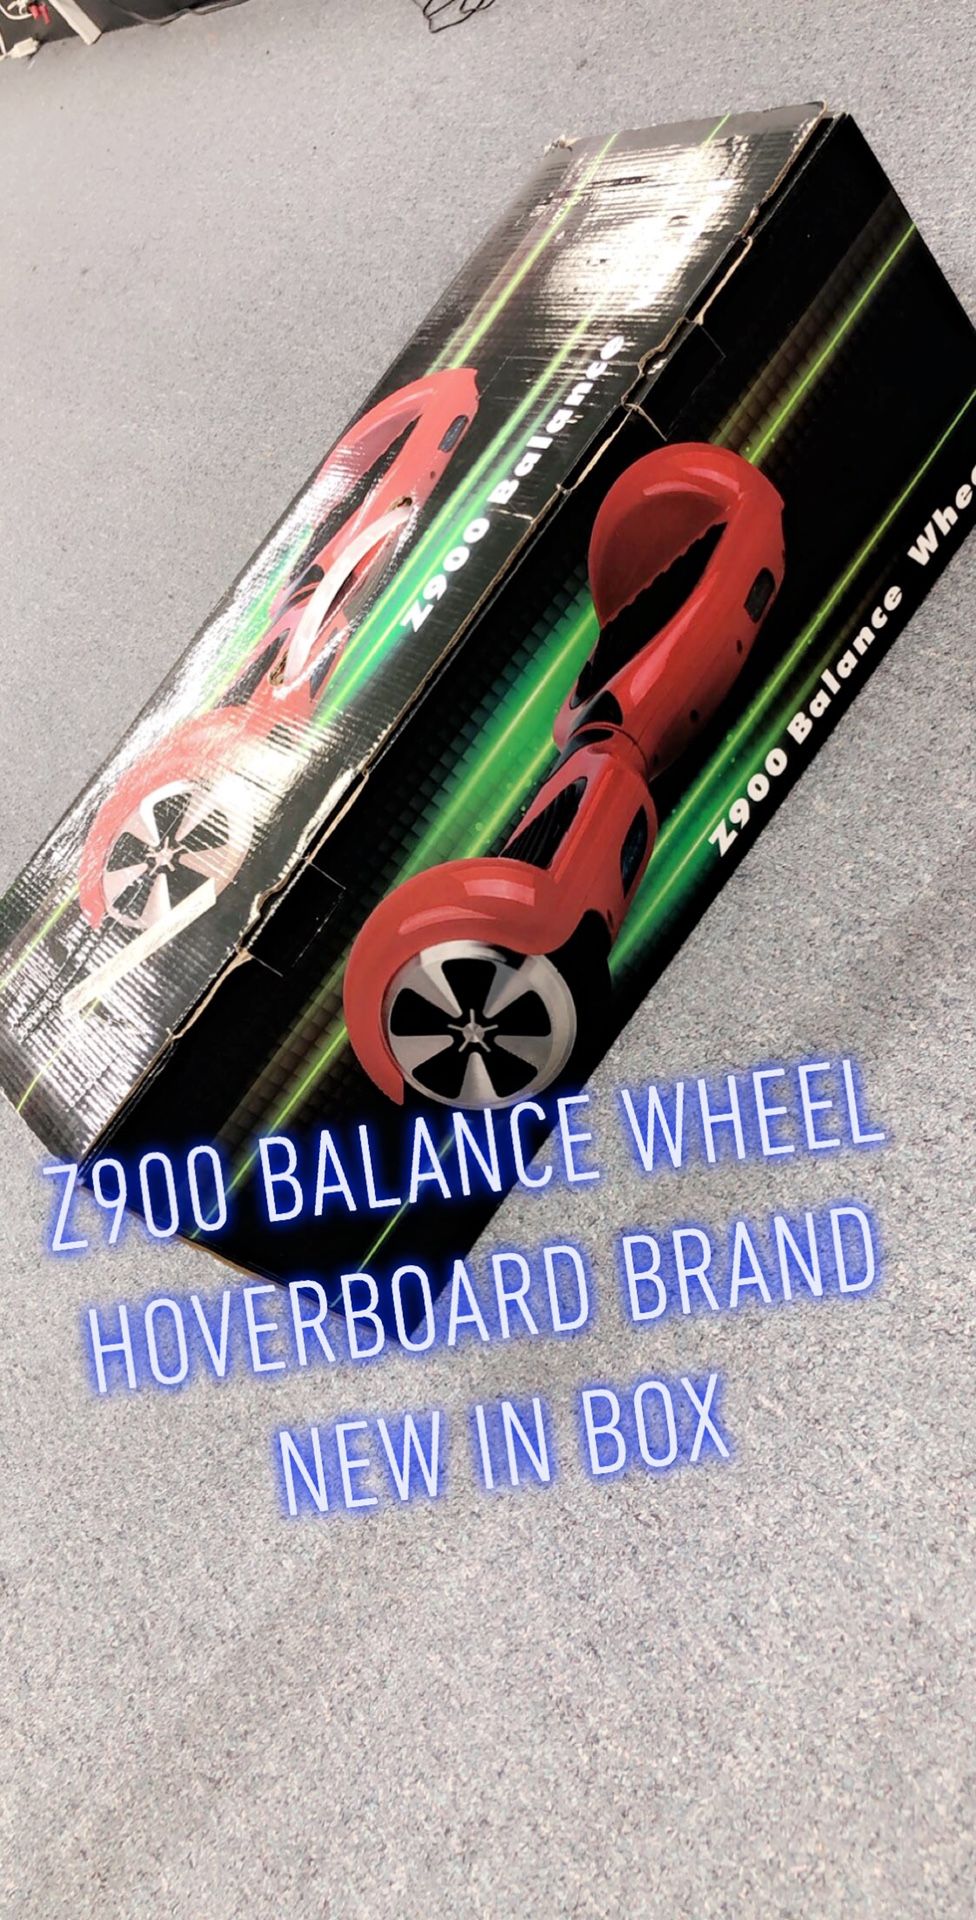 Z900 balance wheel Hoverboard Brand new with box